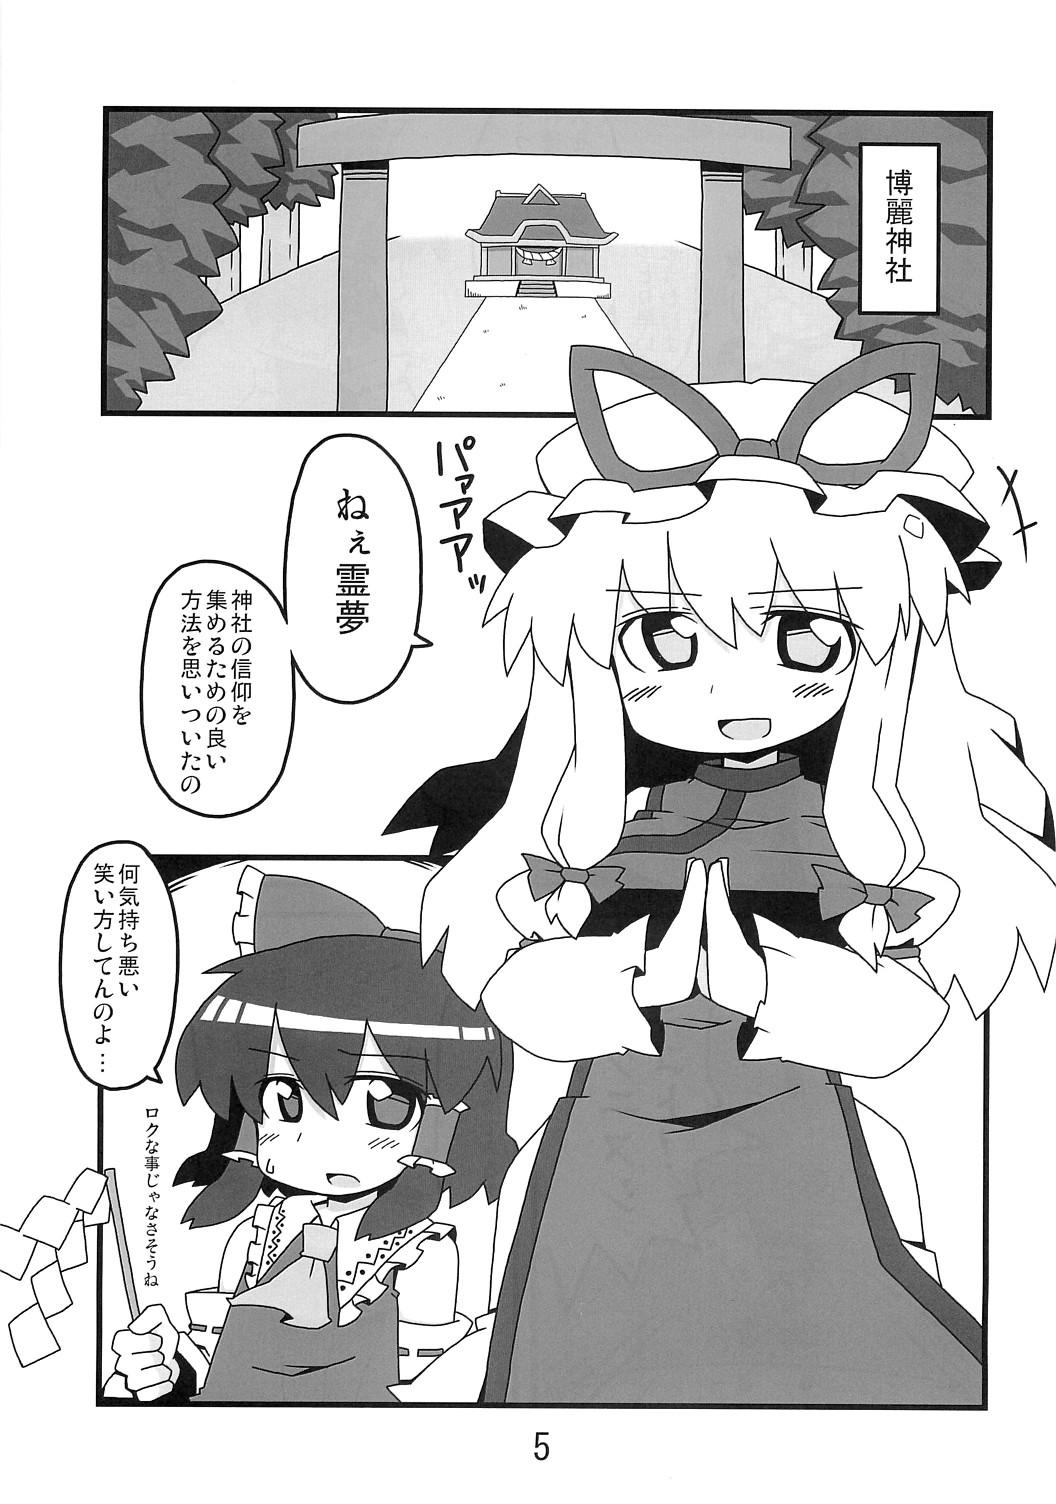 Girls 東方豊年祭 - Touhou project Arabe - Page 4